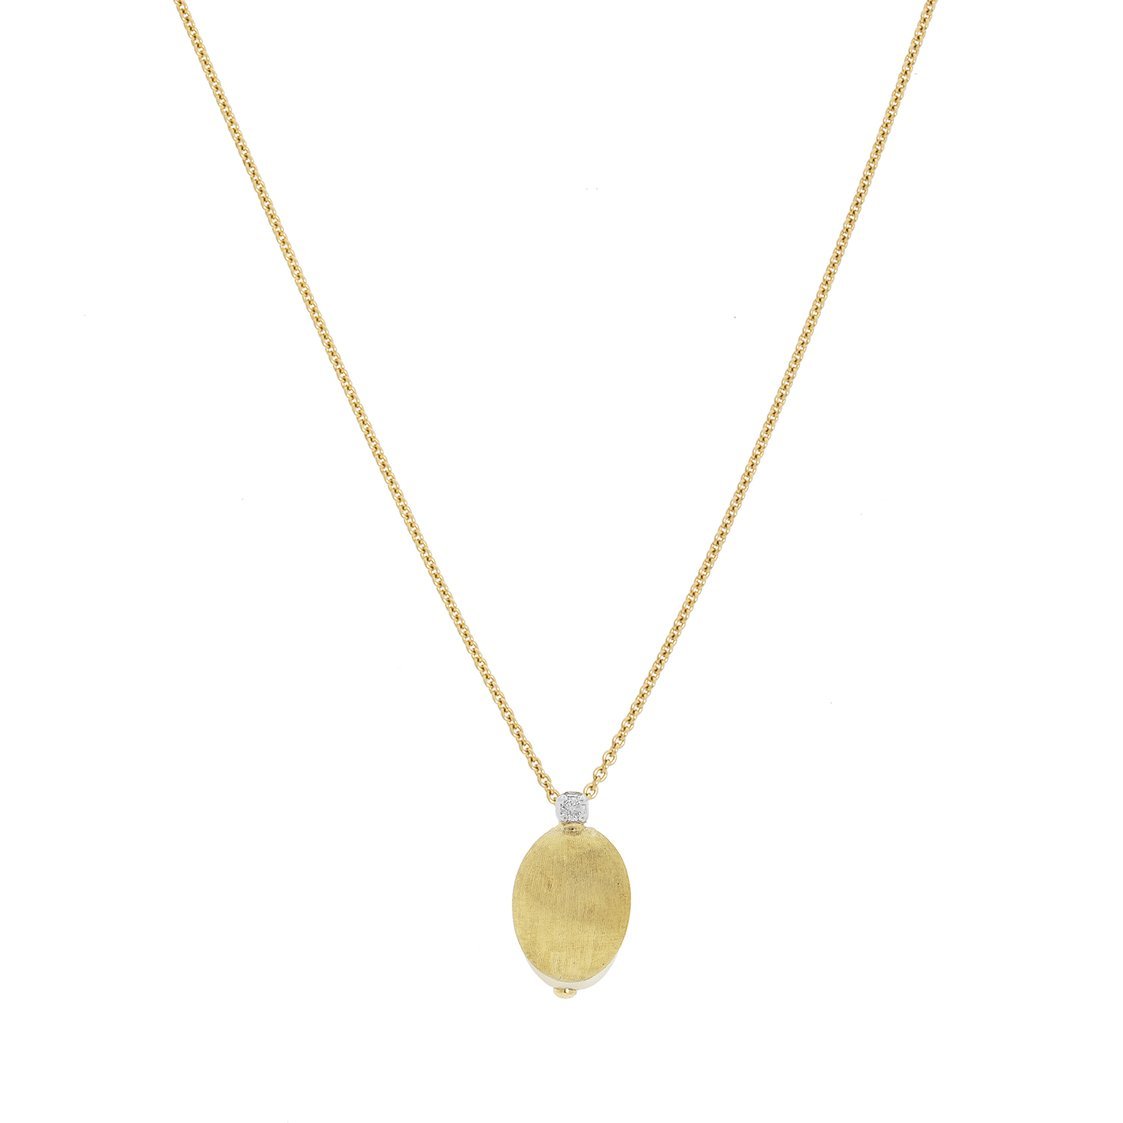 MARCO BICEGO SIVIGLIA YELLOW GOLD PENDANT NECKLACE WITH DIAMOND Default Title